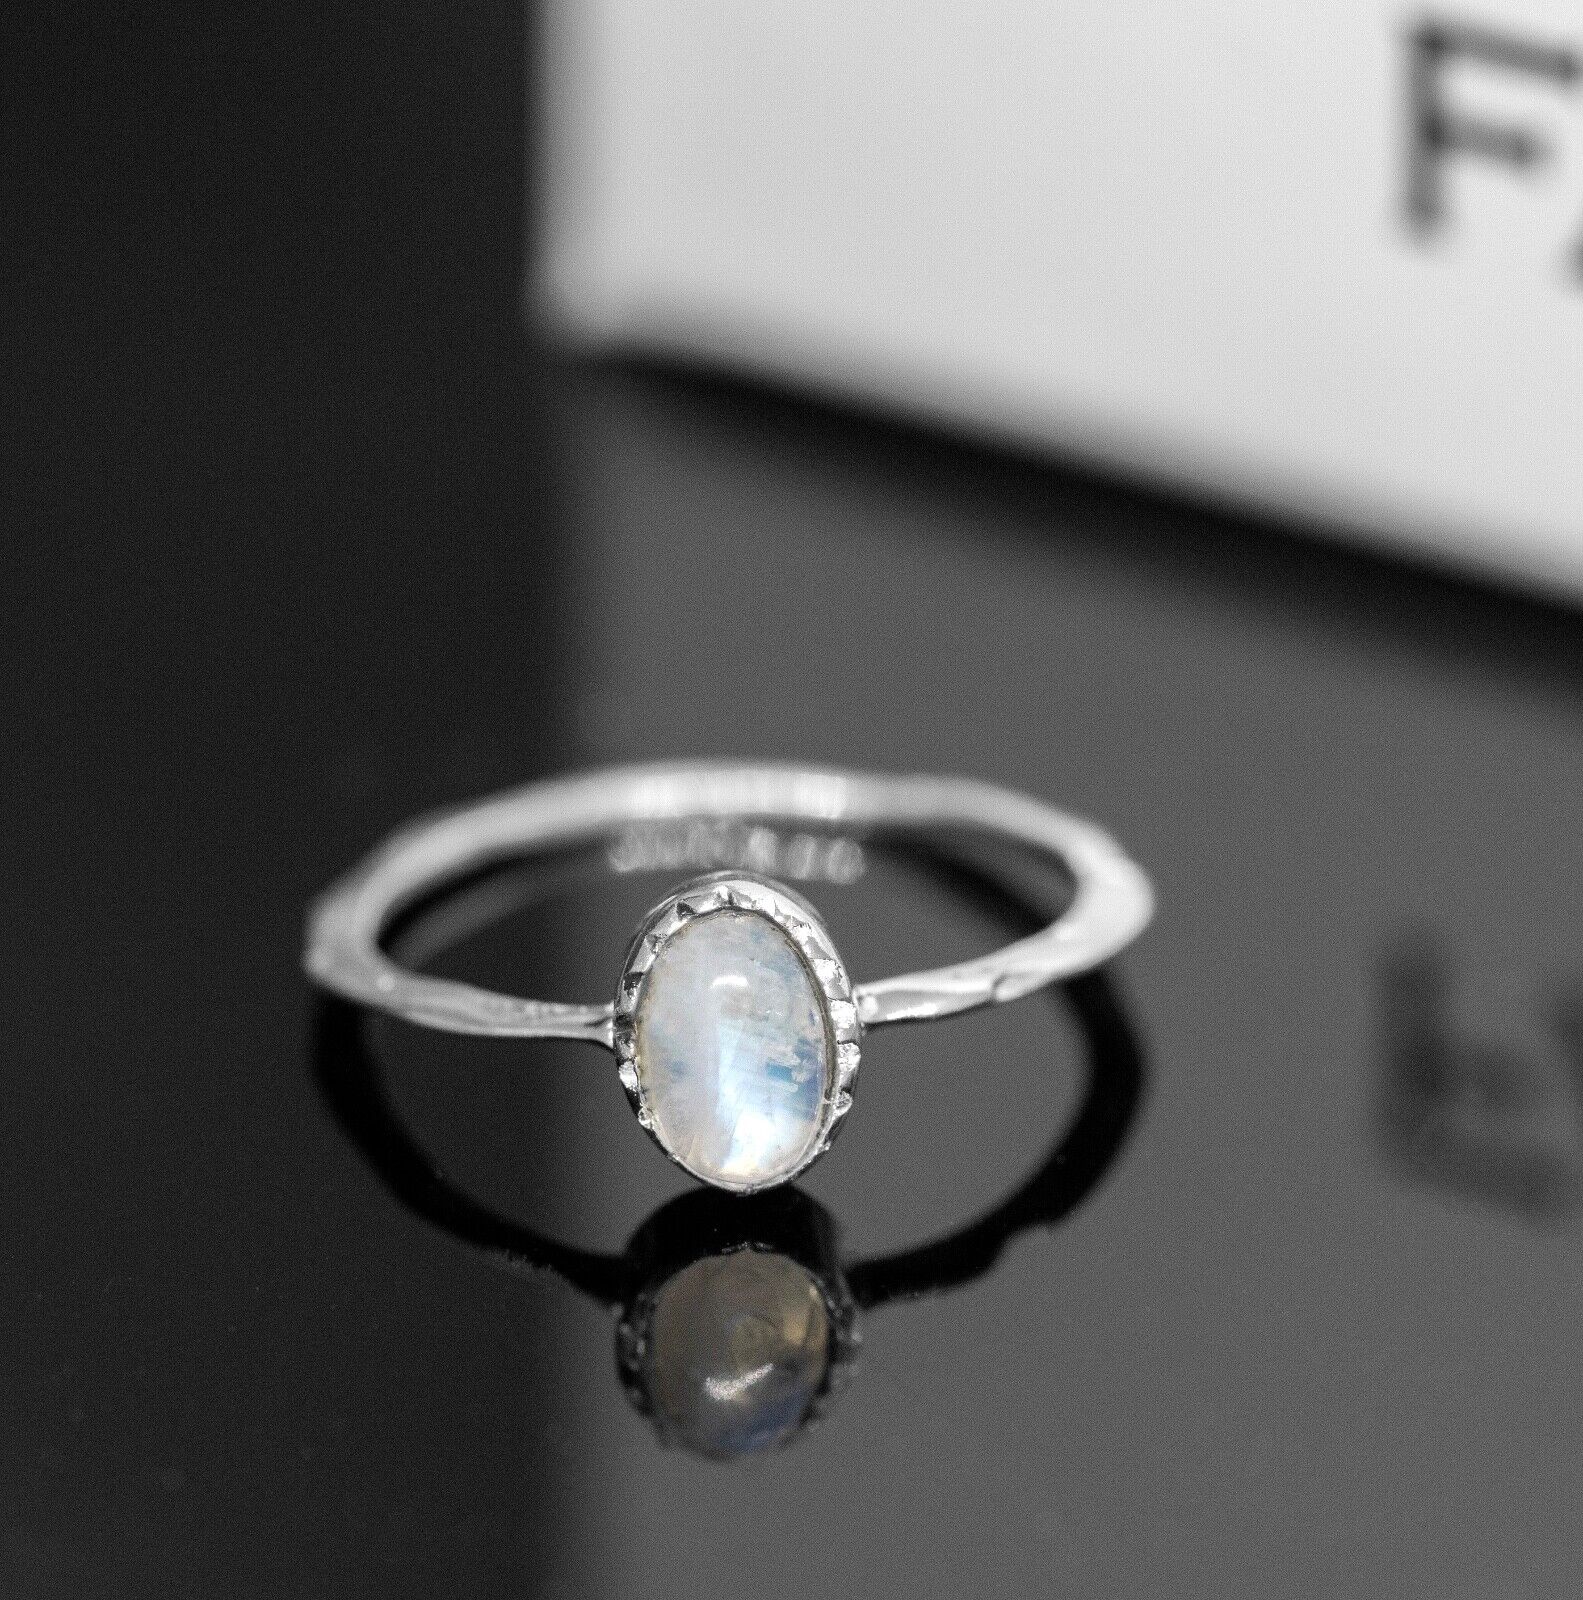 Oval Cut Moonstone Crystal Sterling Silver Dainty Ring Ladies Jewellery Gift